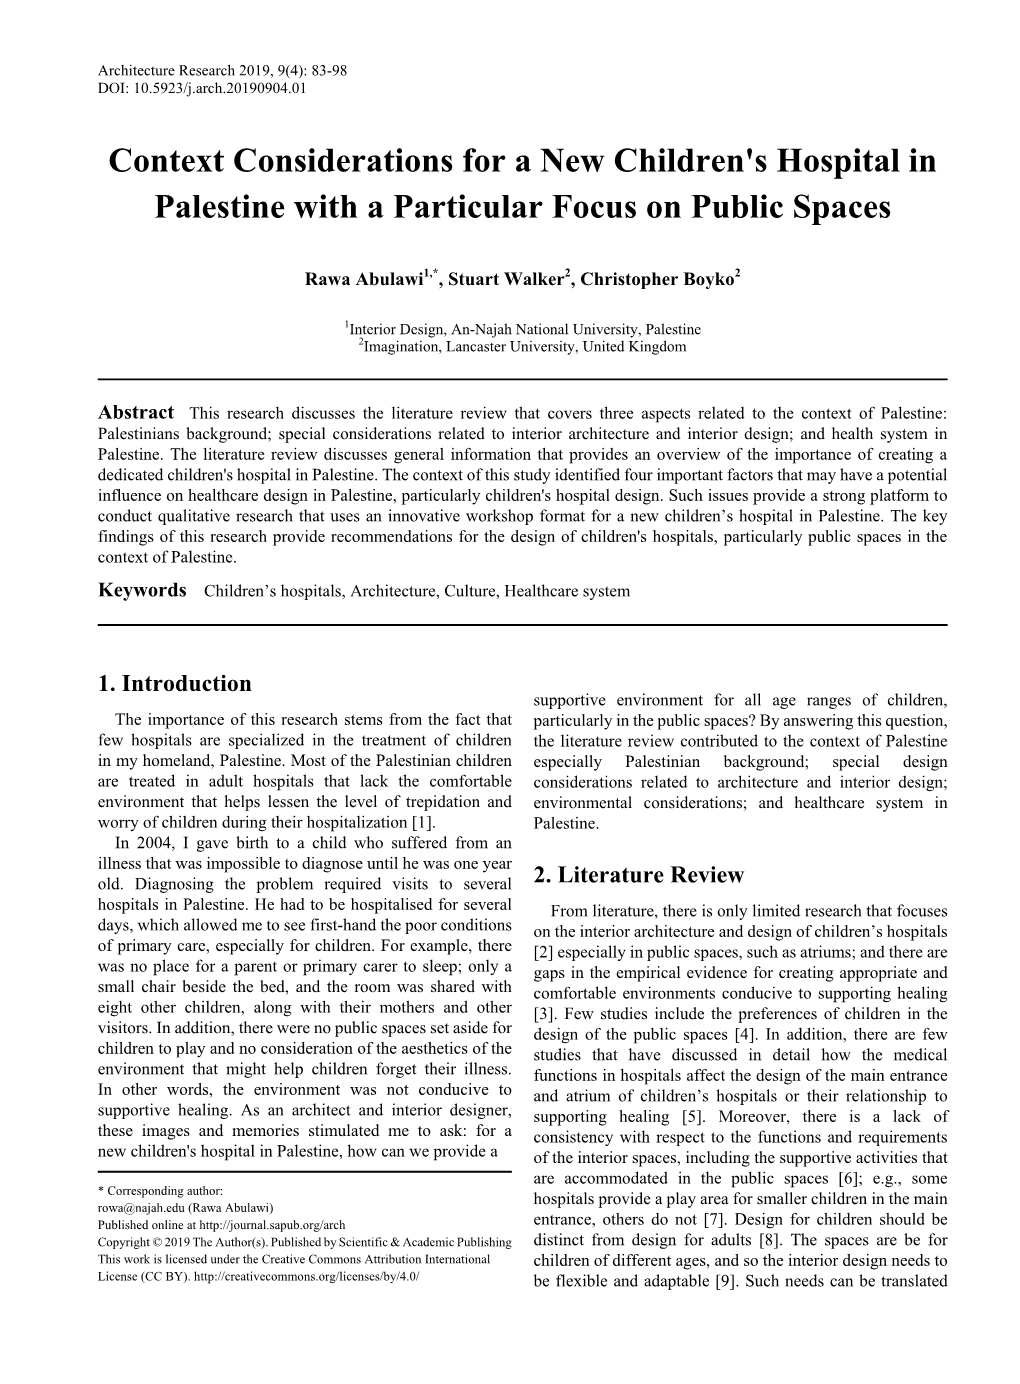 Context Considerations for a New Children's Hospital in Palestine with a Particular Focus on Public Spaces